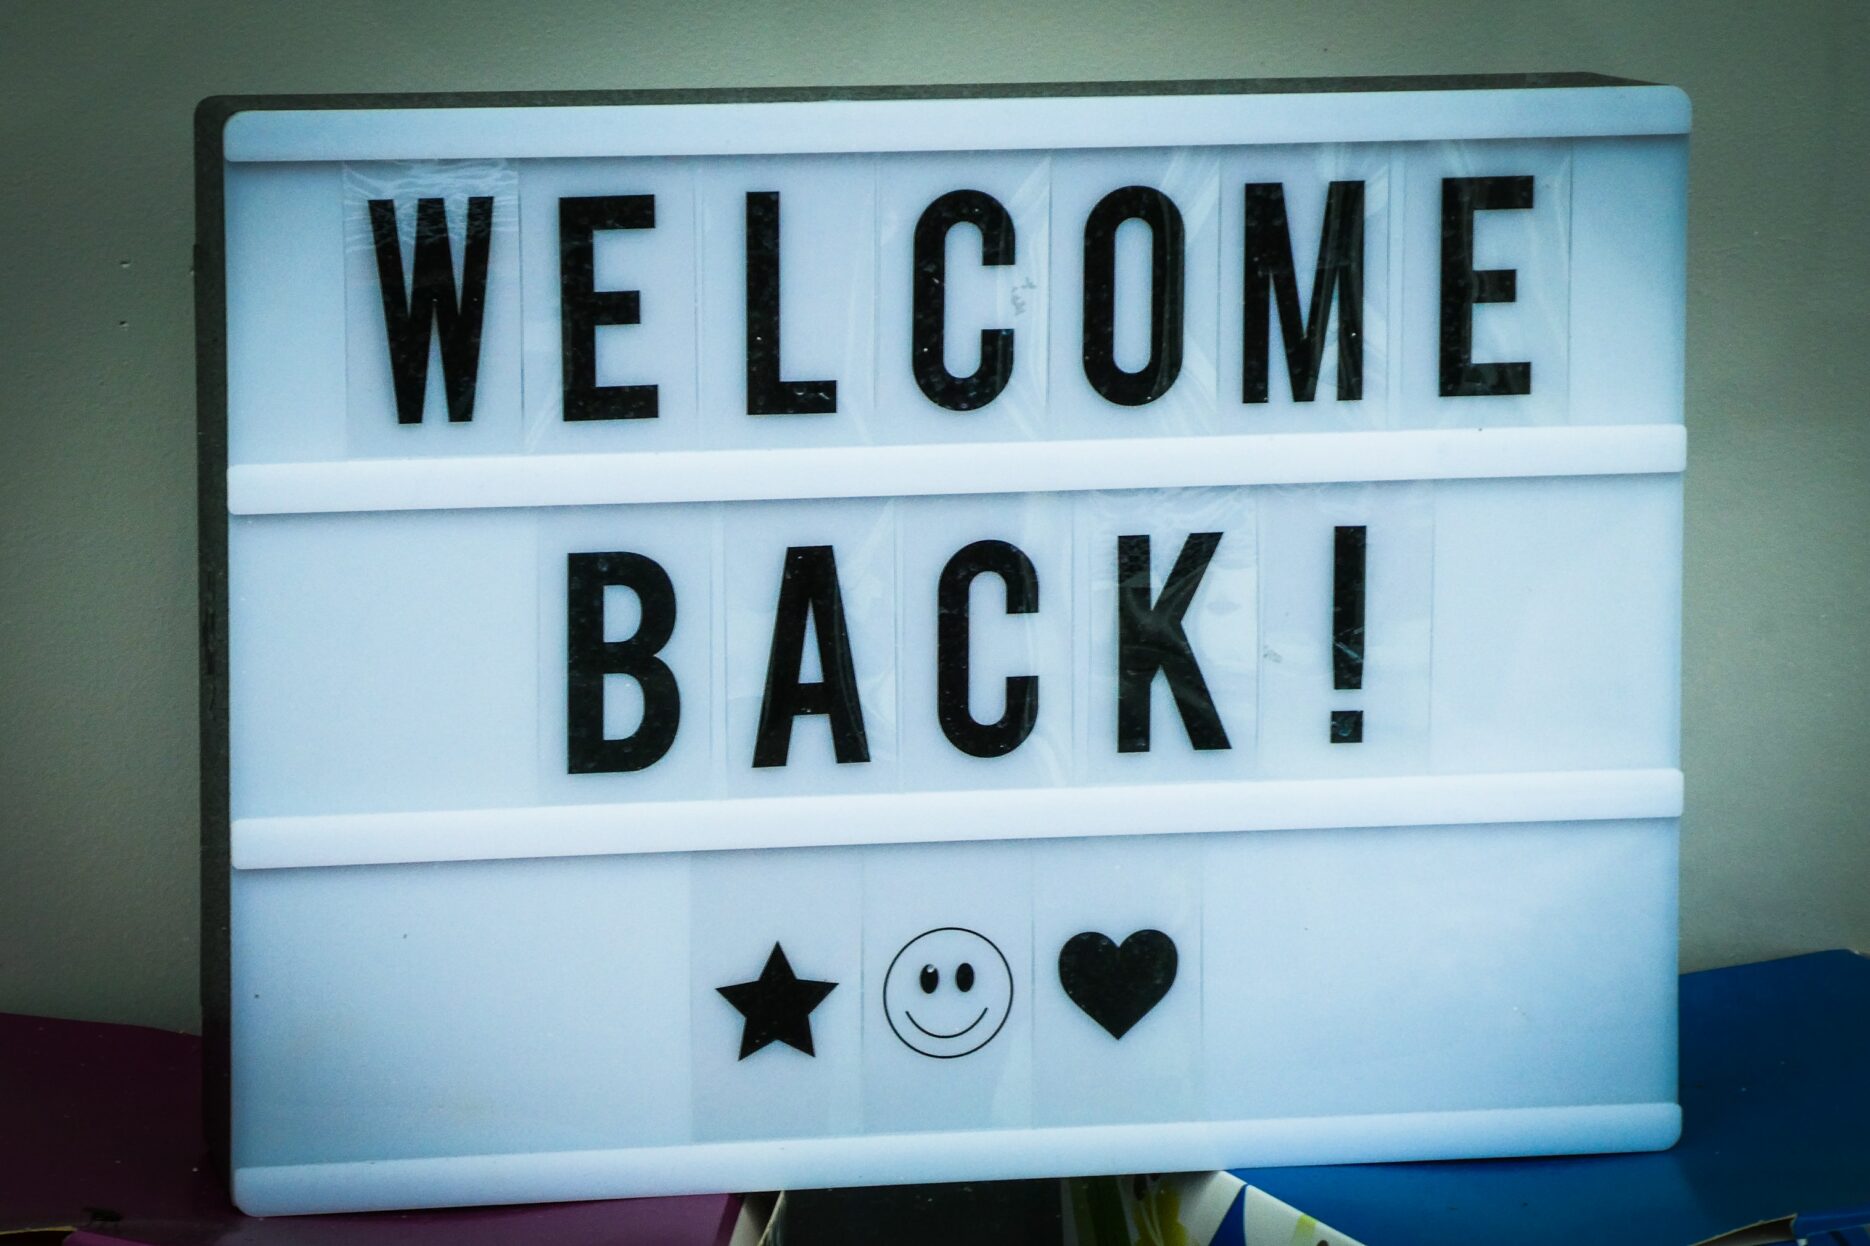 A white sign with removable black text reads "Welcome Back!" Below the words are a star, smily face, and heart. The sign is leaning against a wall and positioned on a desk.